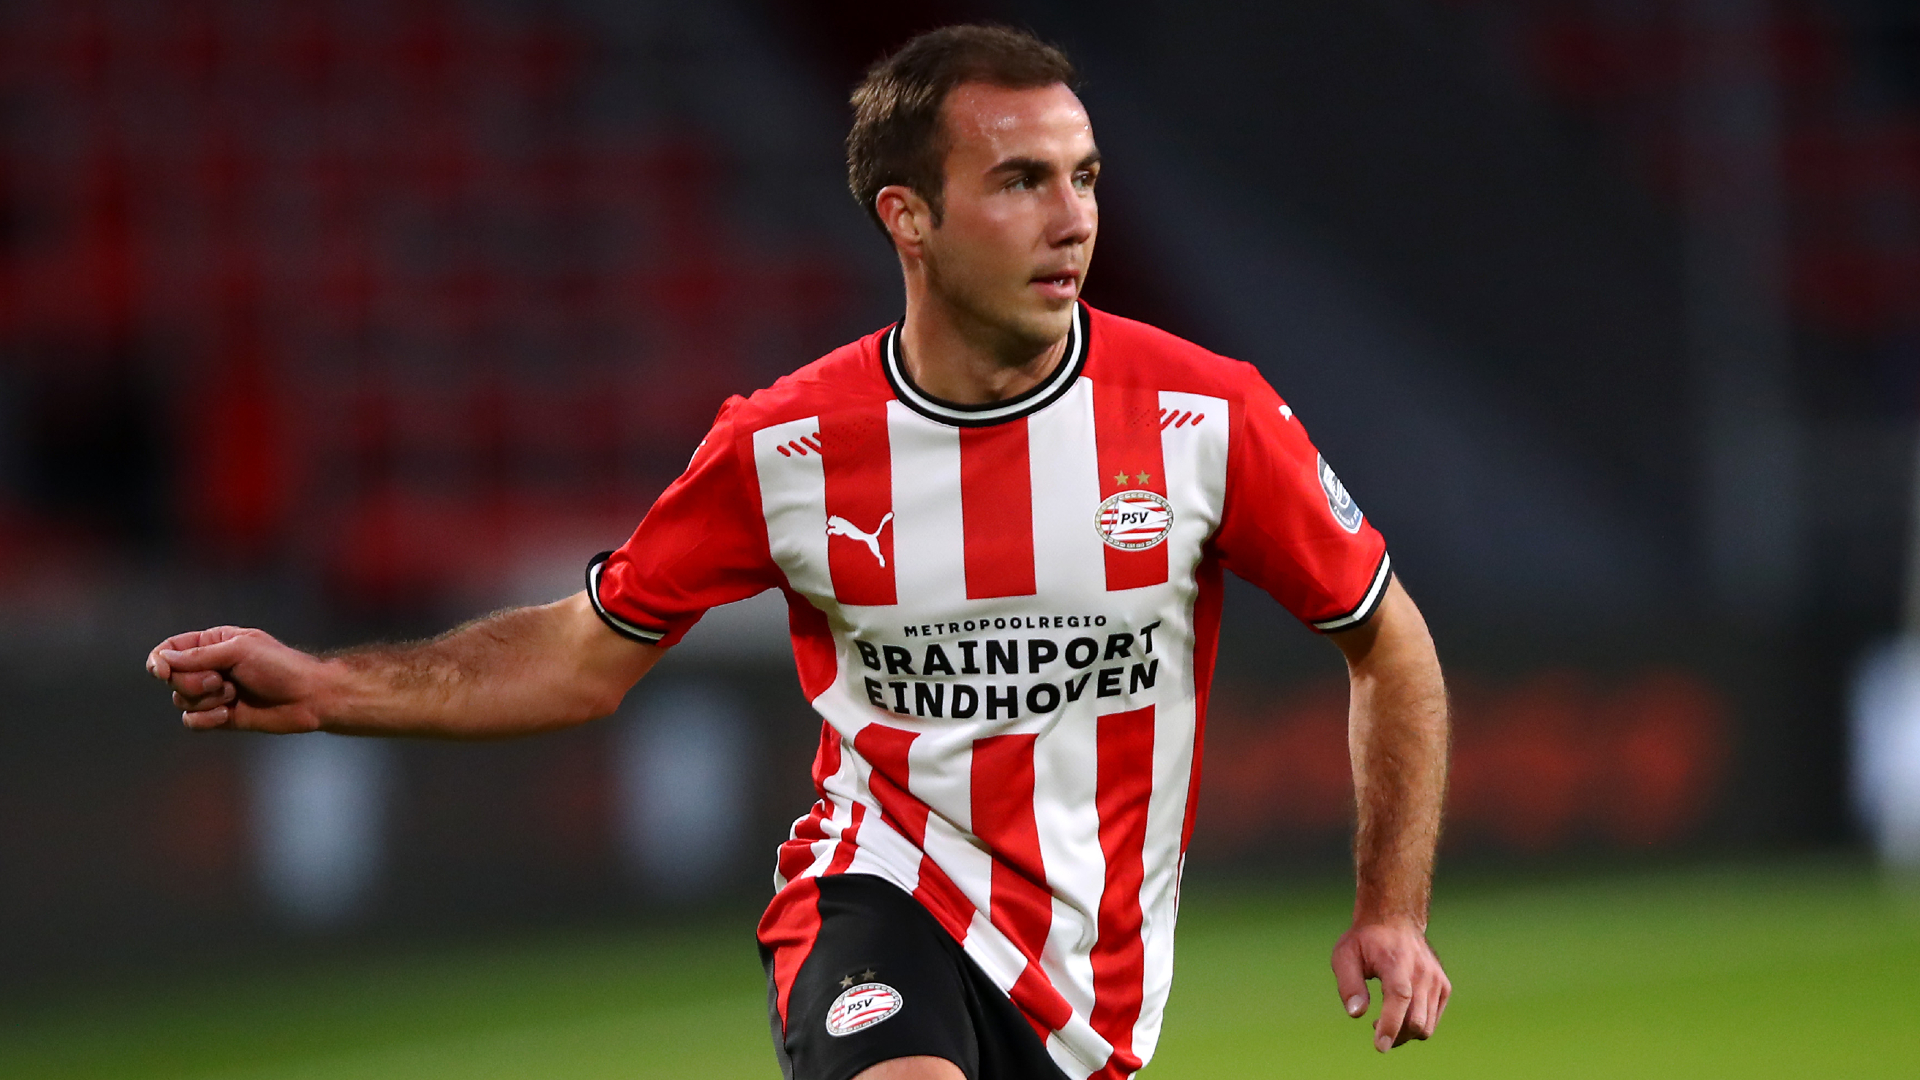 'Maybe I put too much pressure on myself' - Gotze reflects on career journey after PSV move